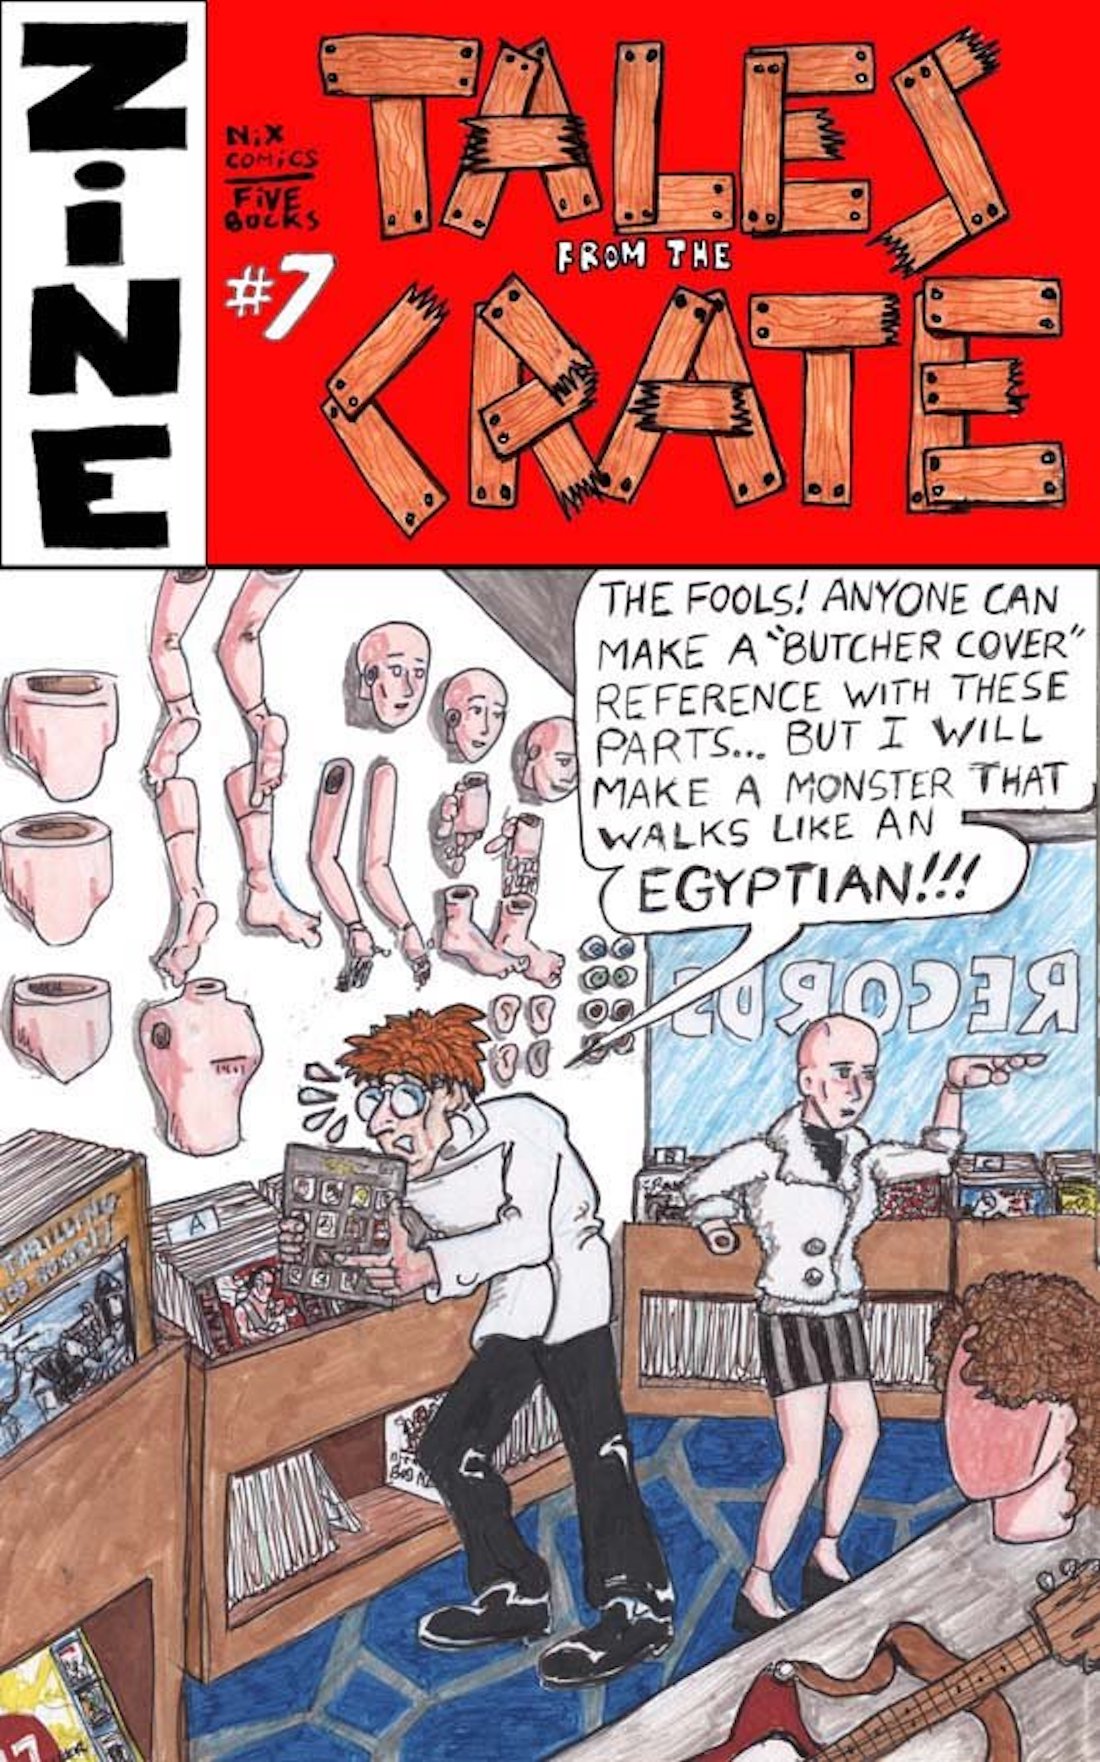 Comic book cover called Tales from the Crate